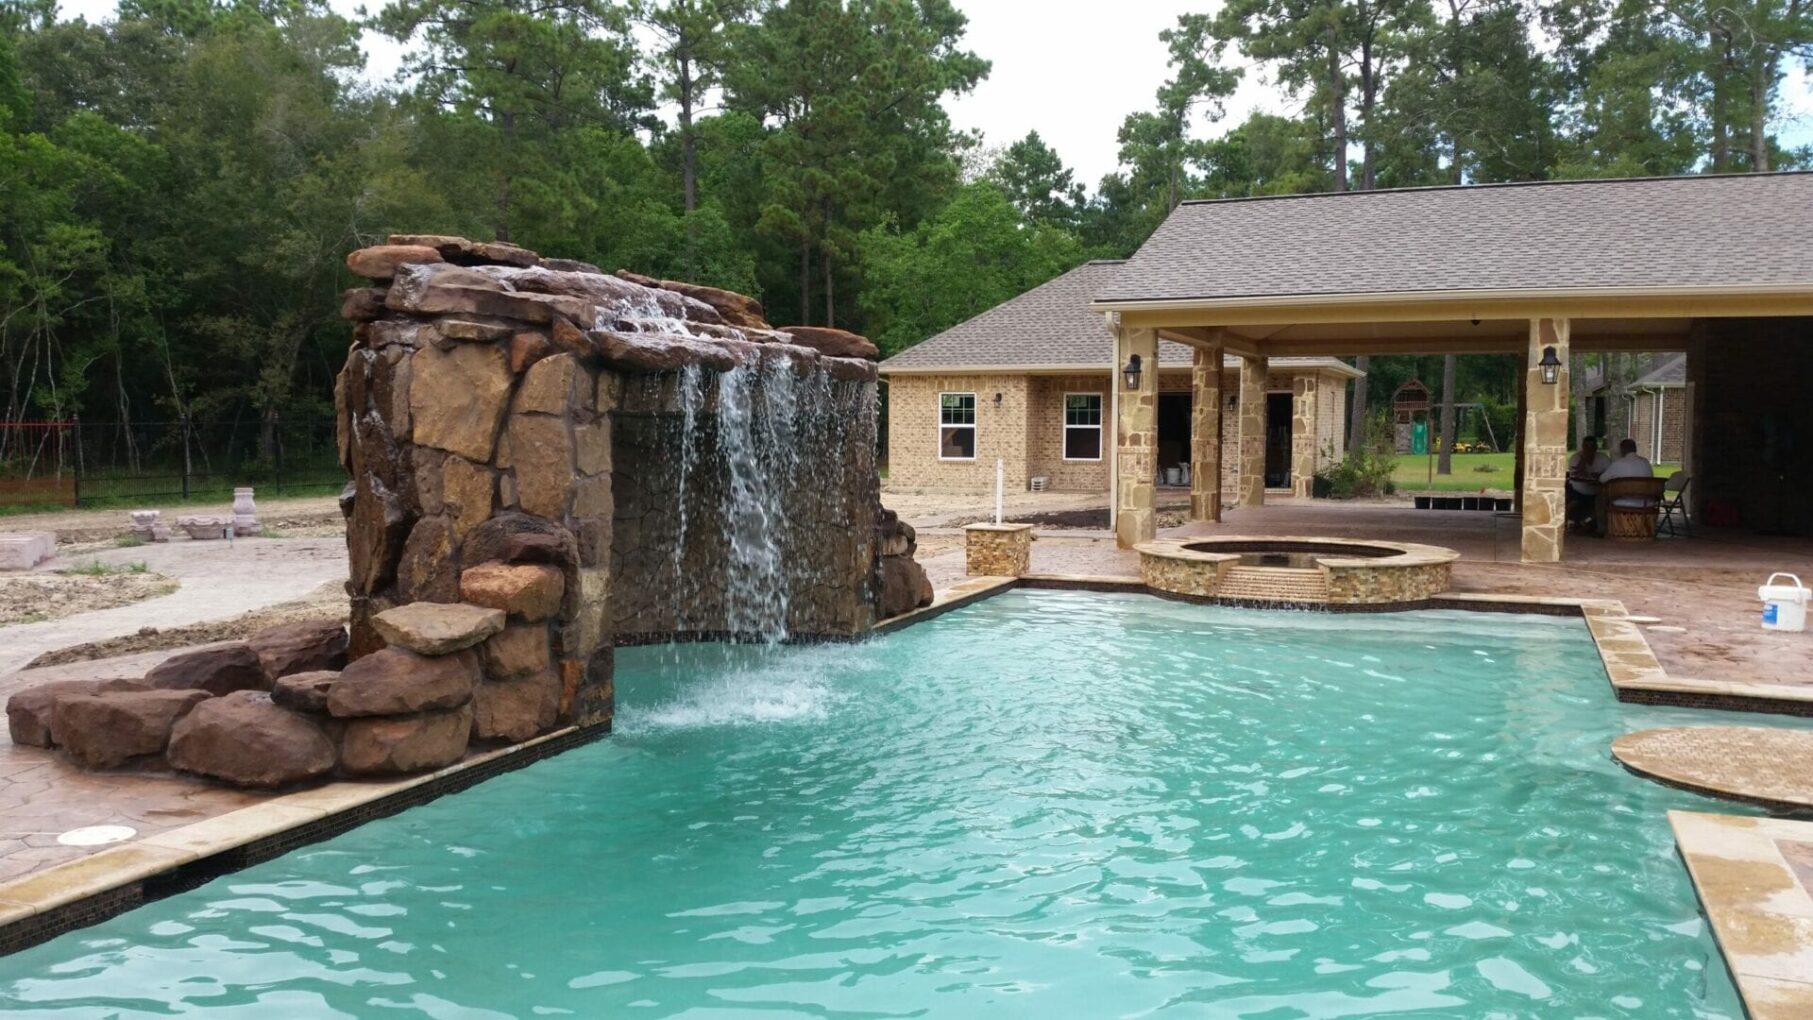 A pool with a waterfall and a stone wall.